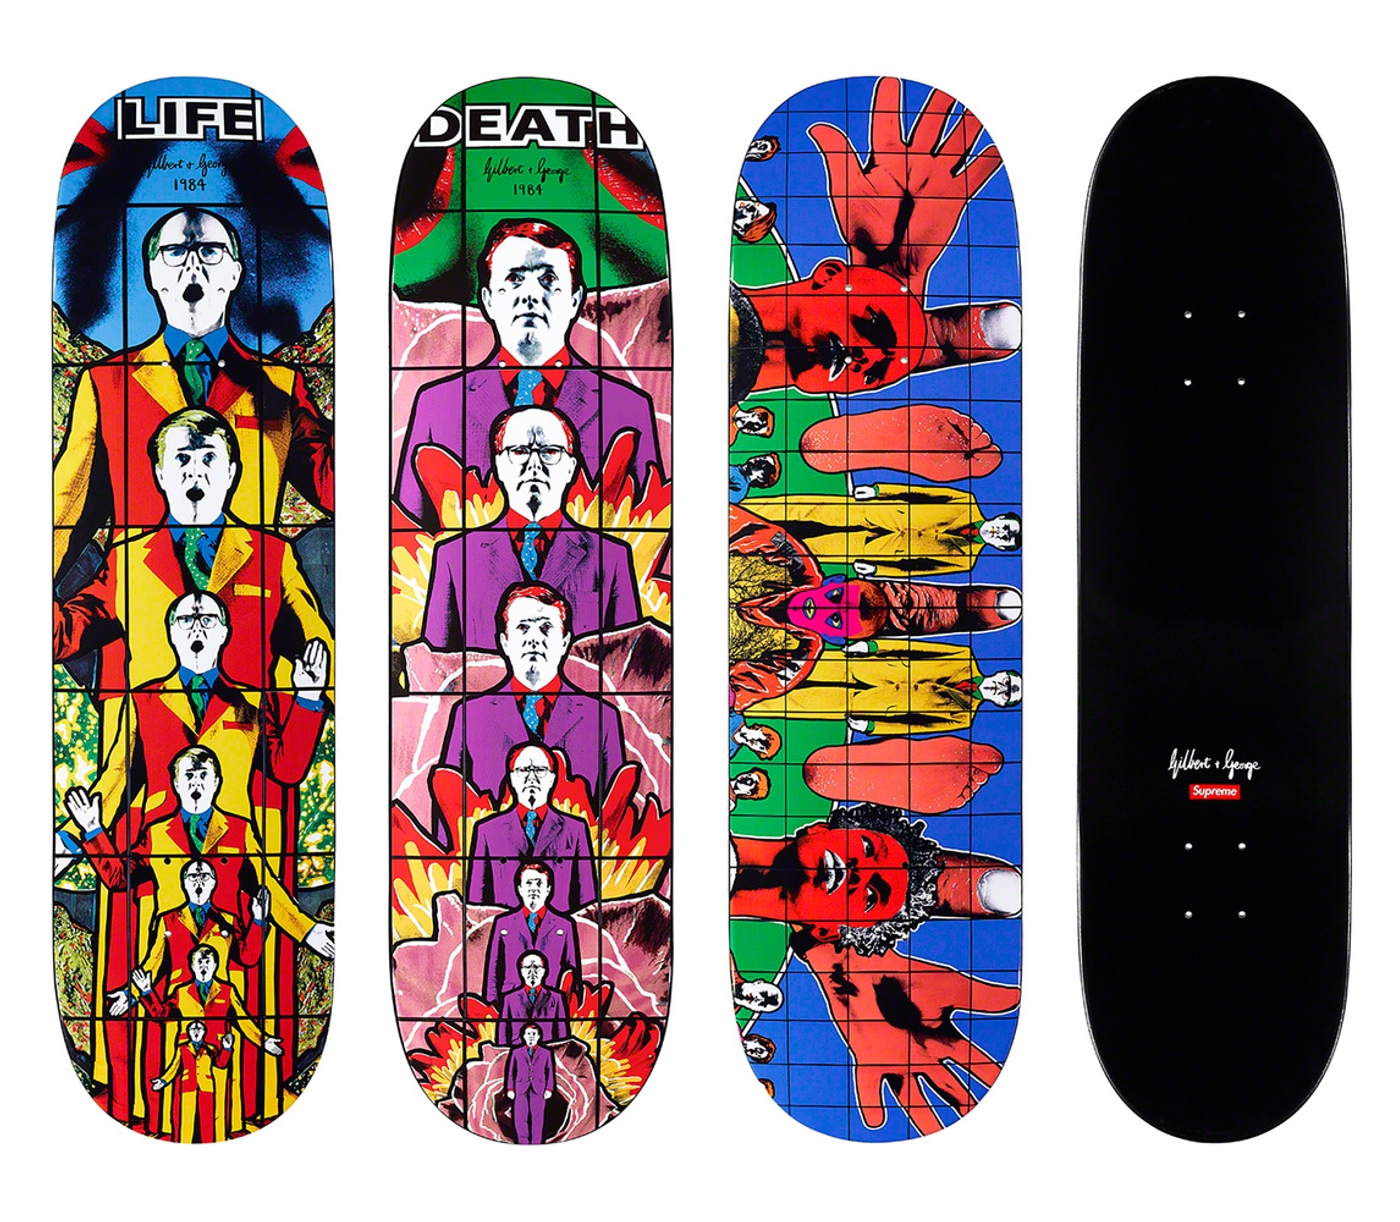 LIFE, DEATH and DEATH AFTER LIFE Skateboards (11/13)